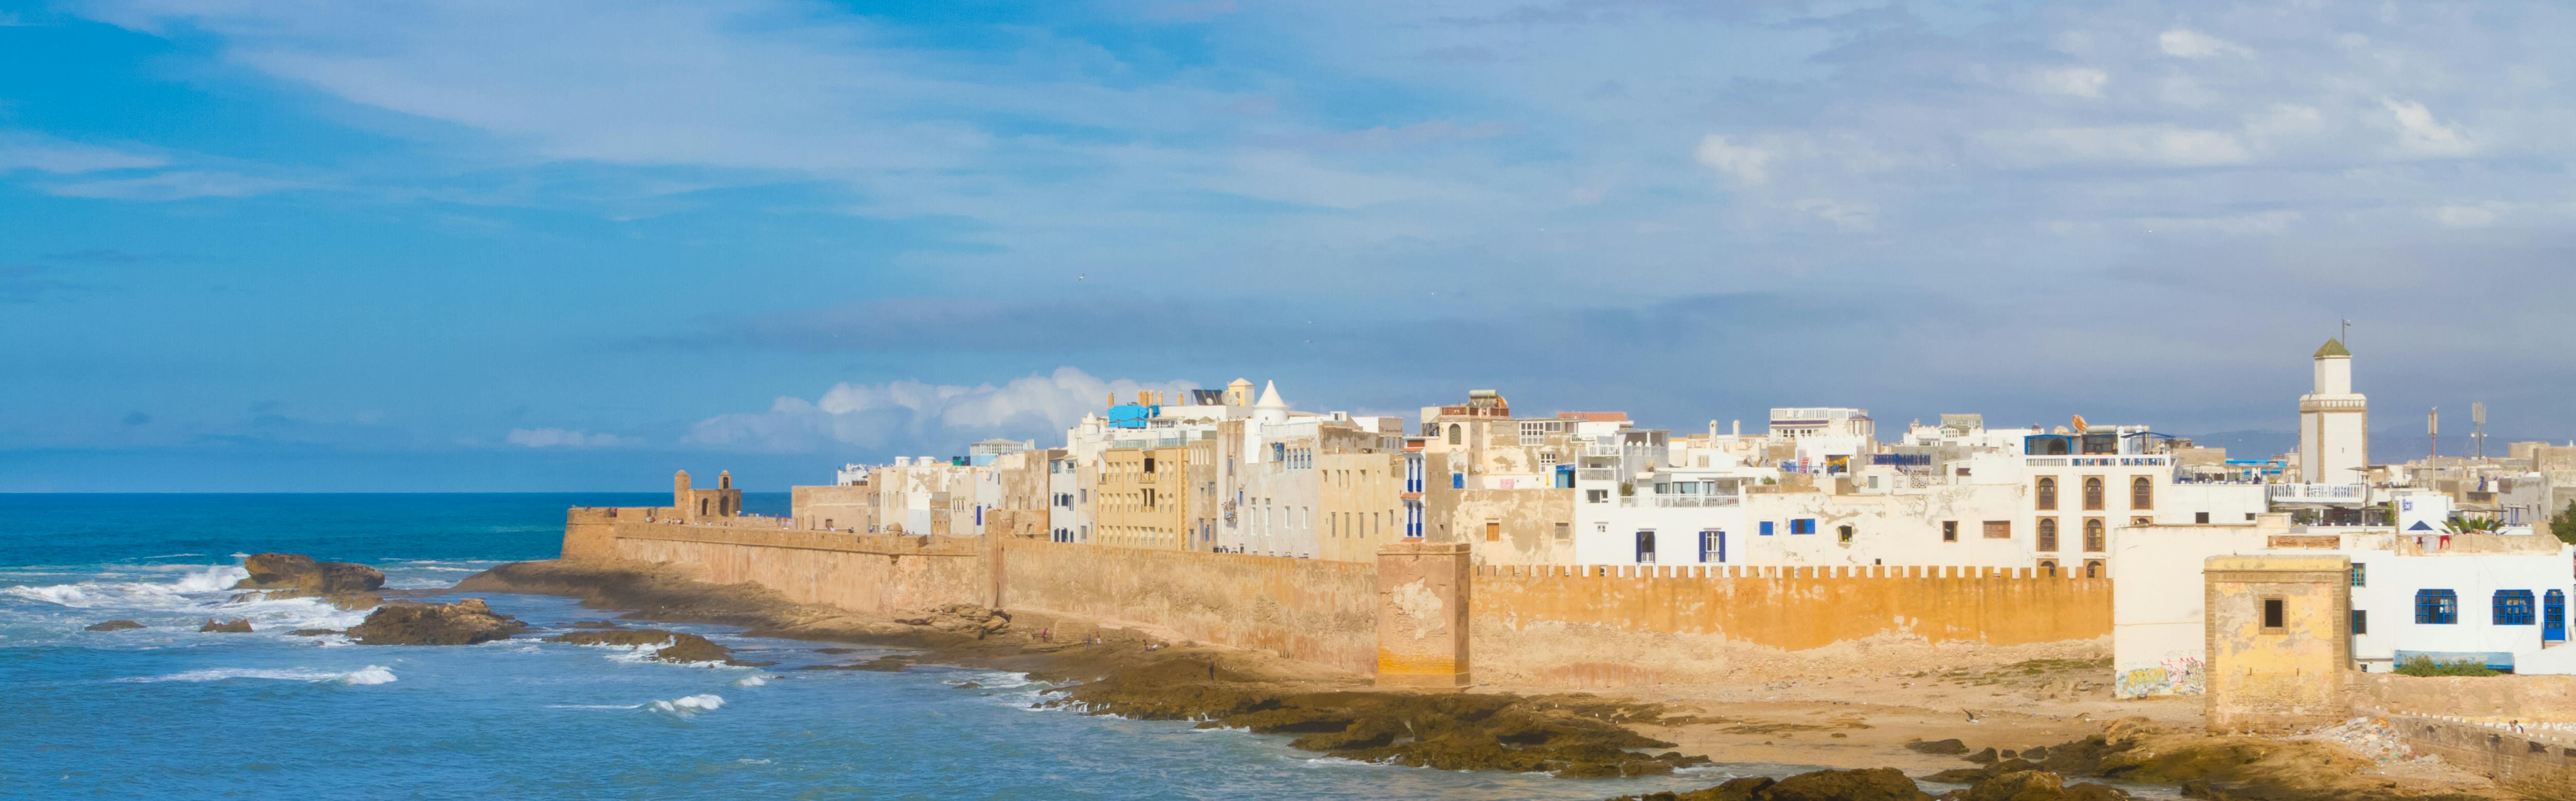 Essaouira full-day excursion from Marrakech